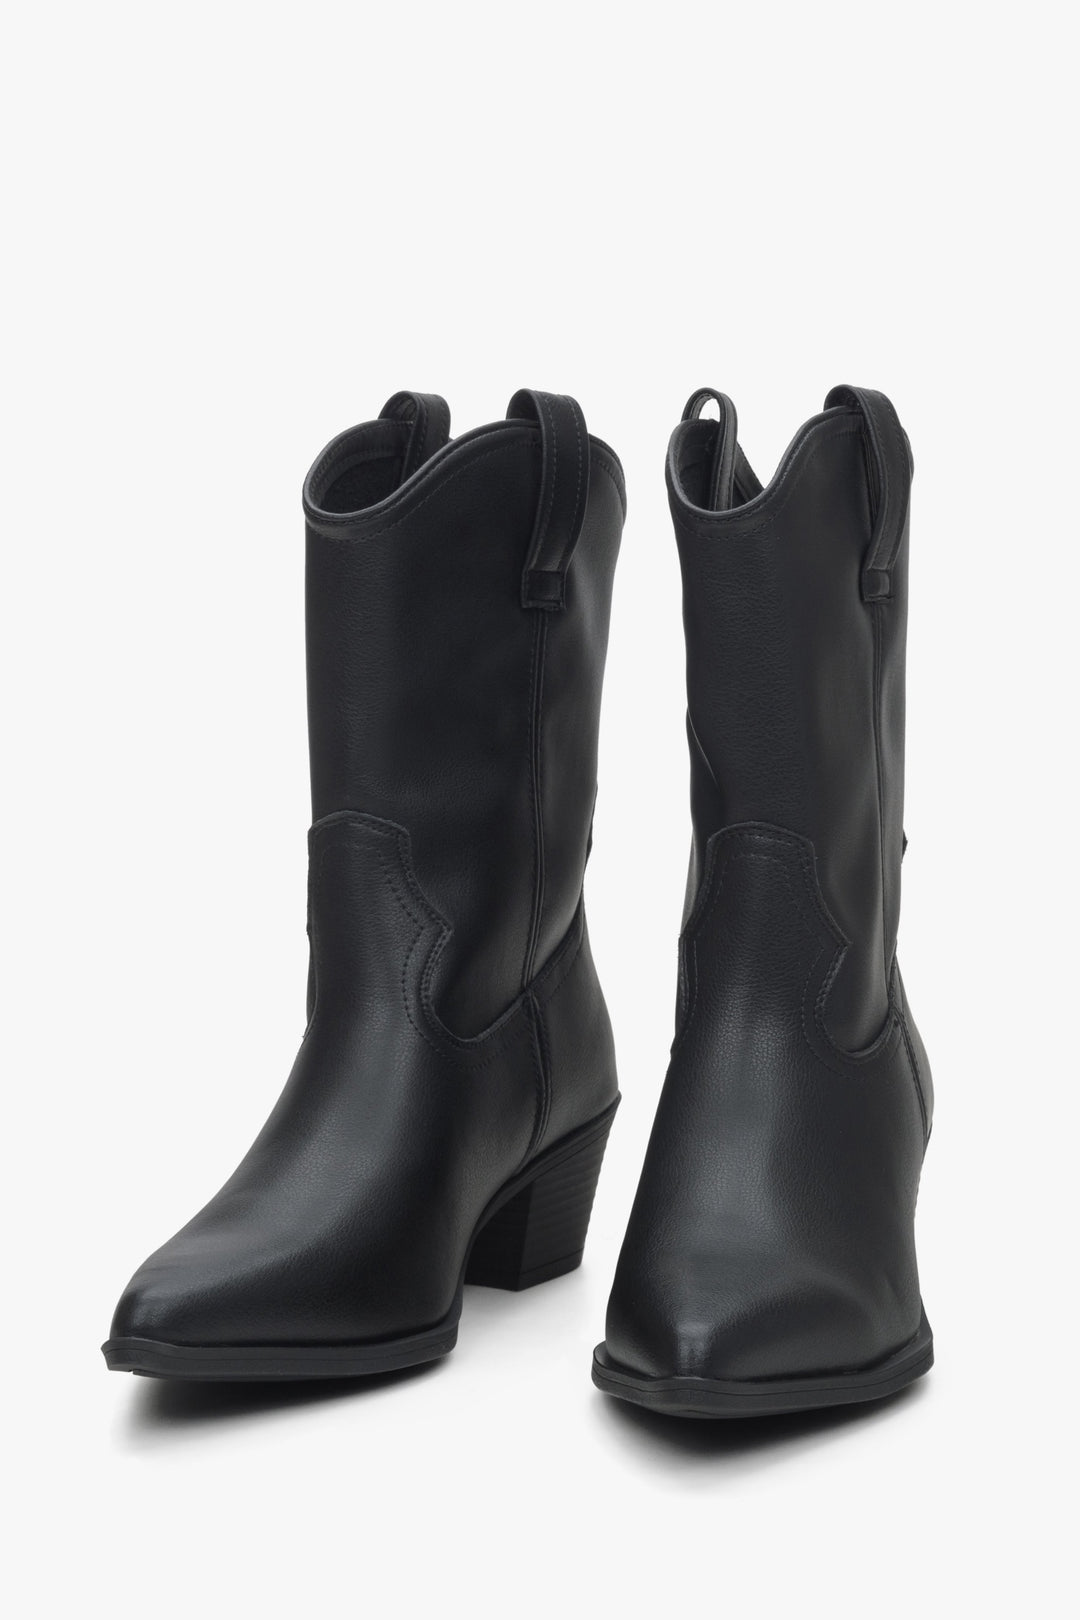 Women's Cowboy black low-cut boots by Estro - perfect for spring.